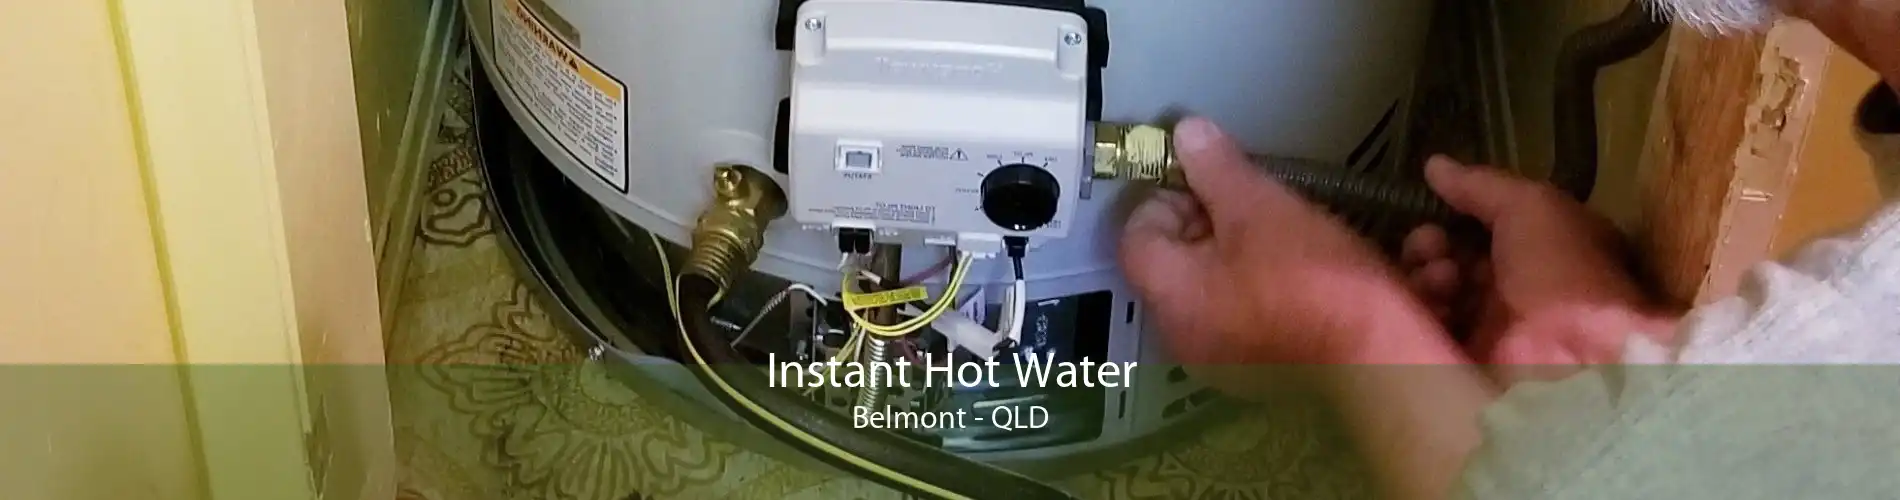 Instant Hot Water Belmont - QLD